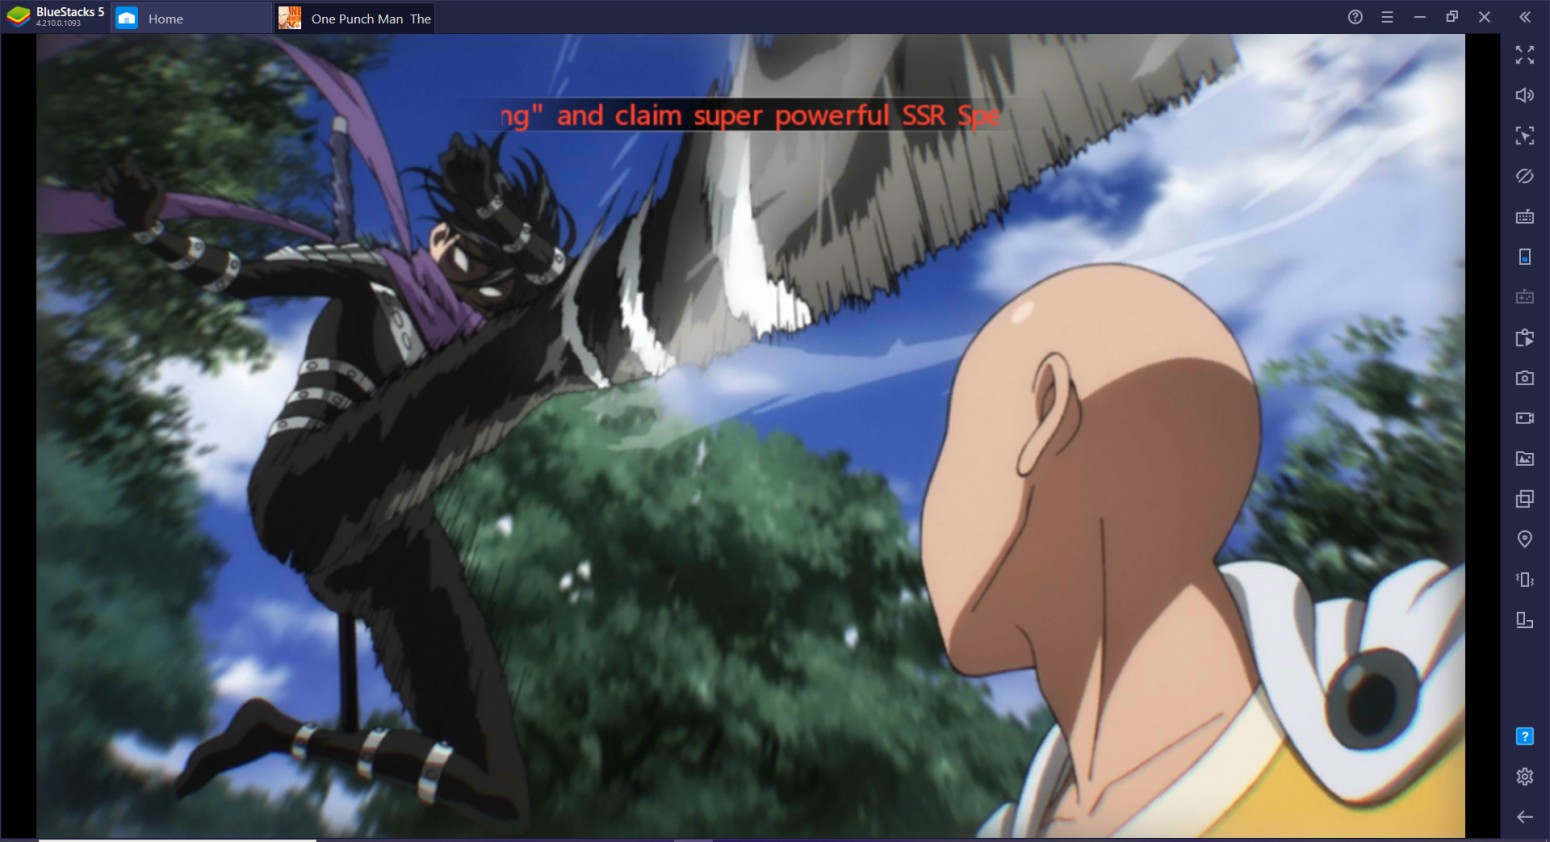 In-depth Guide to Keymapping One Punch Man: The Strongest on BlueStacks